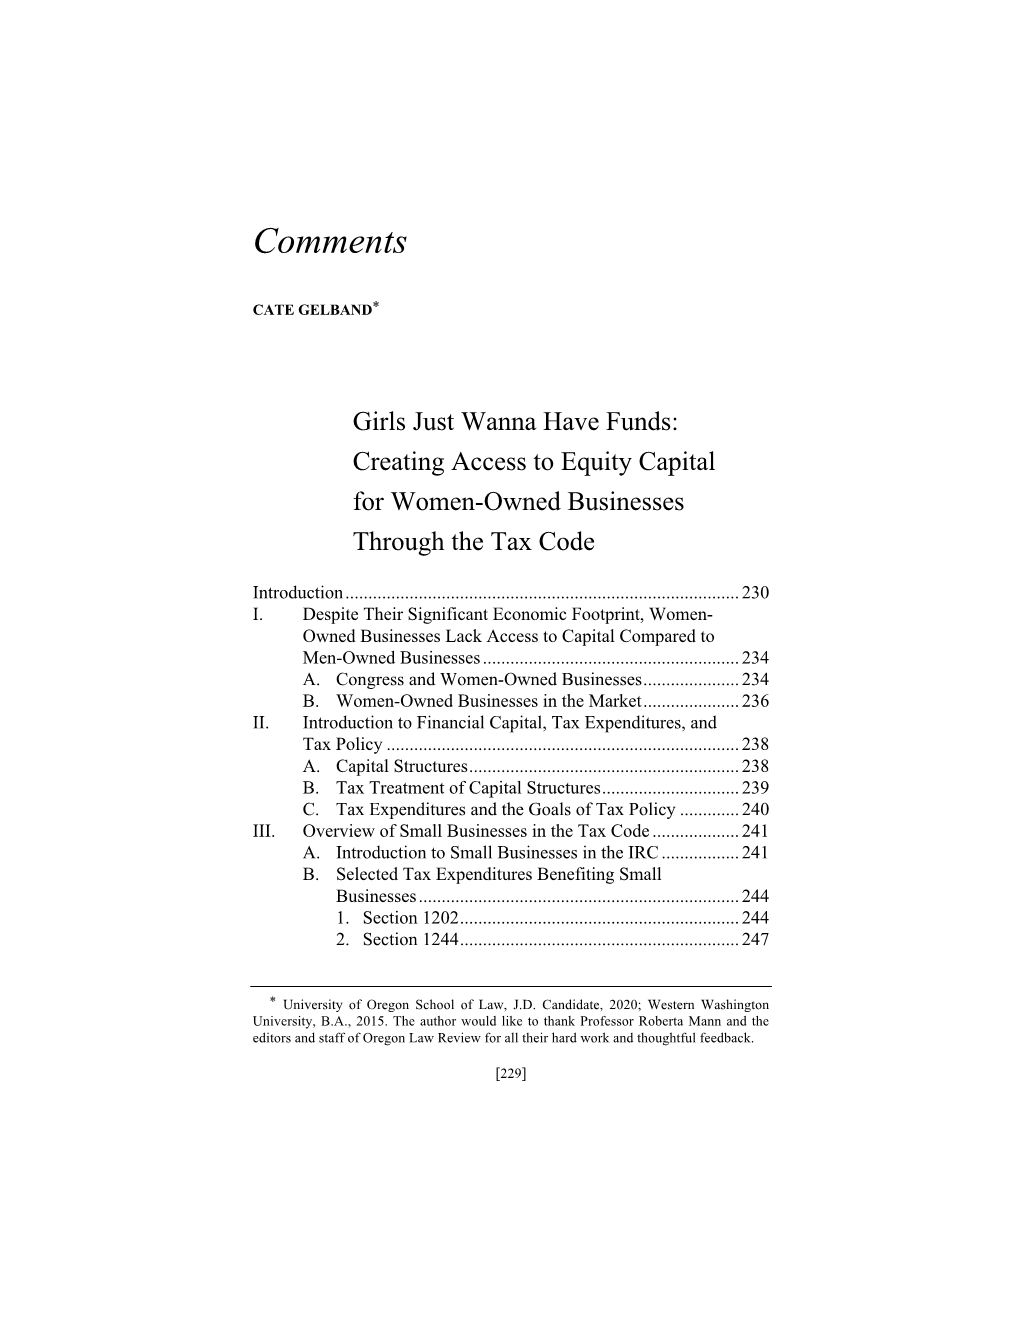 Creating Access to Equity Capital for Women-Owned Businesses Through the Tax Code